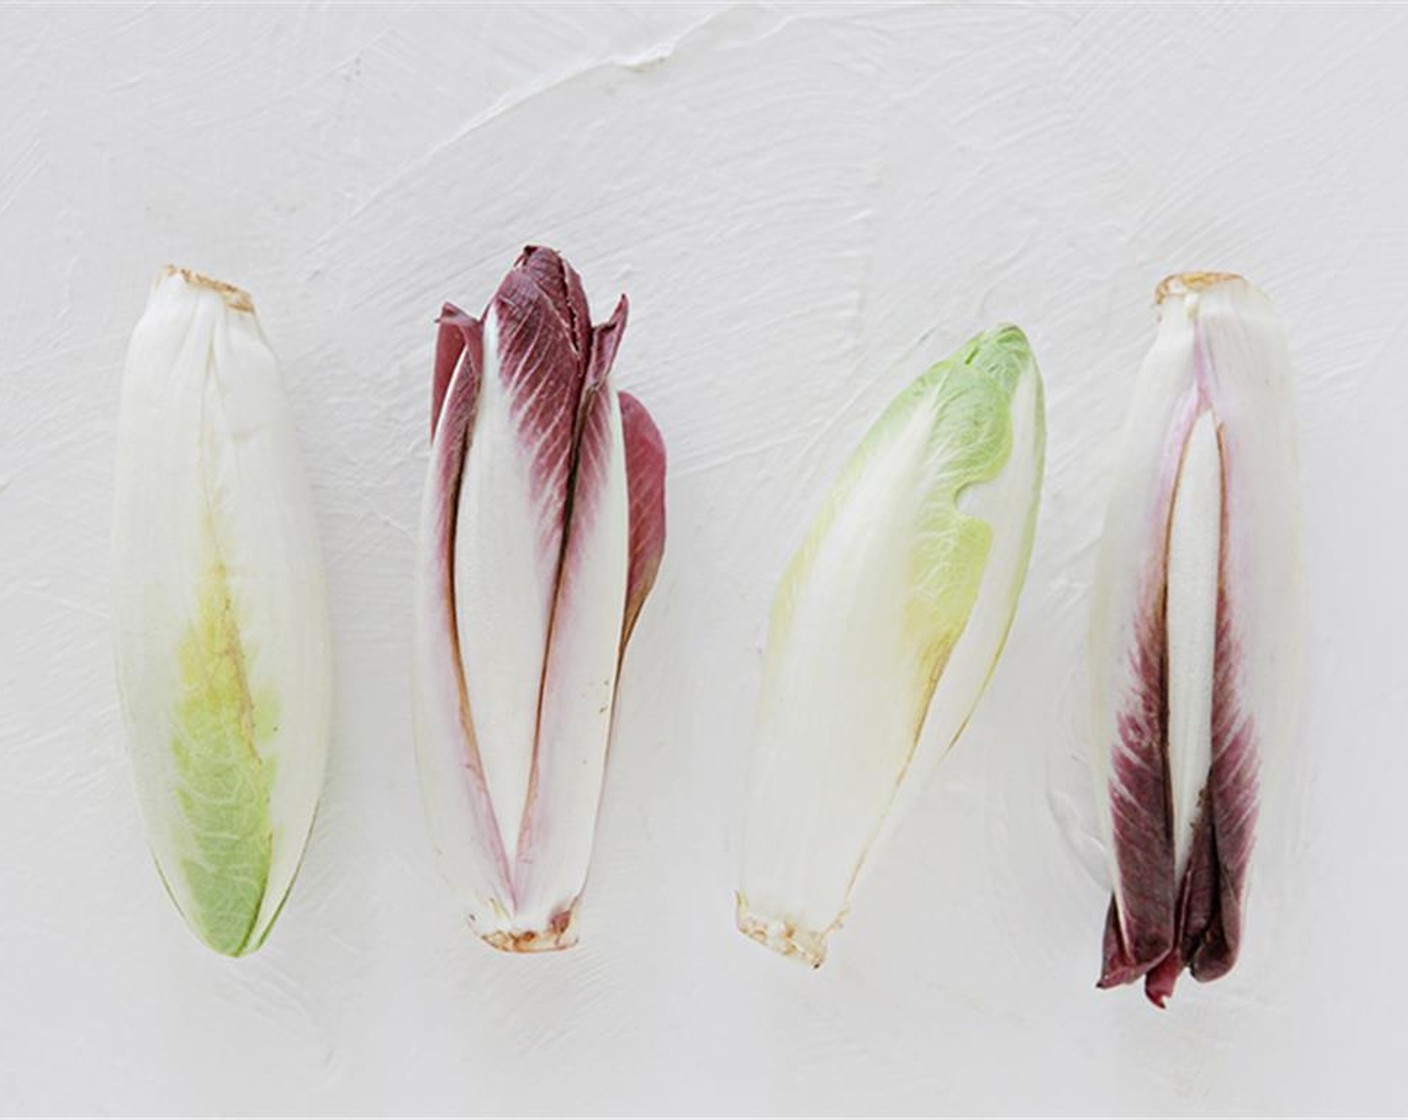 step 1 De-stem and roughly chop the Curly Endive (1 cup), White Belgian Endive (1 cup) and Red Belgian Endive (1 cup).